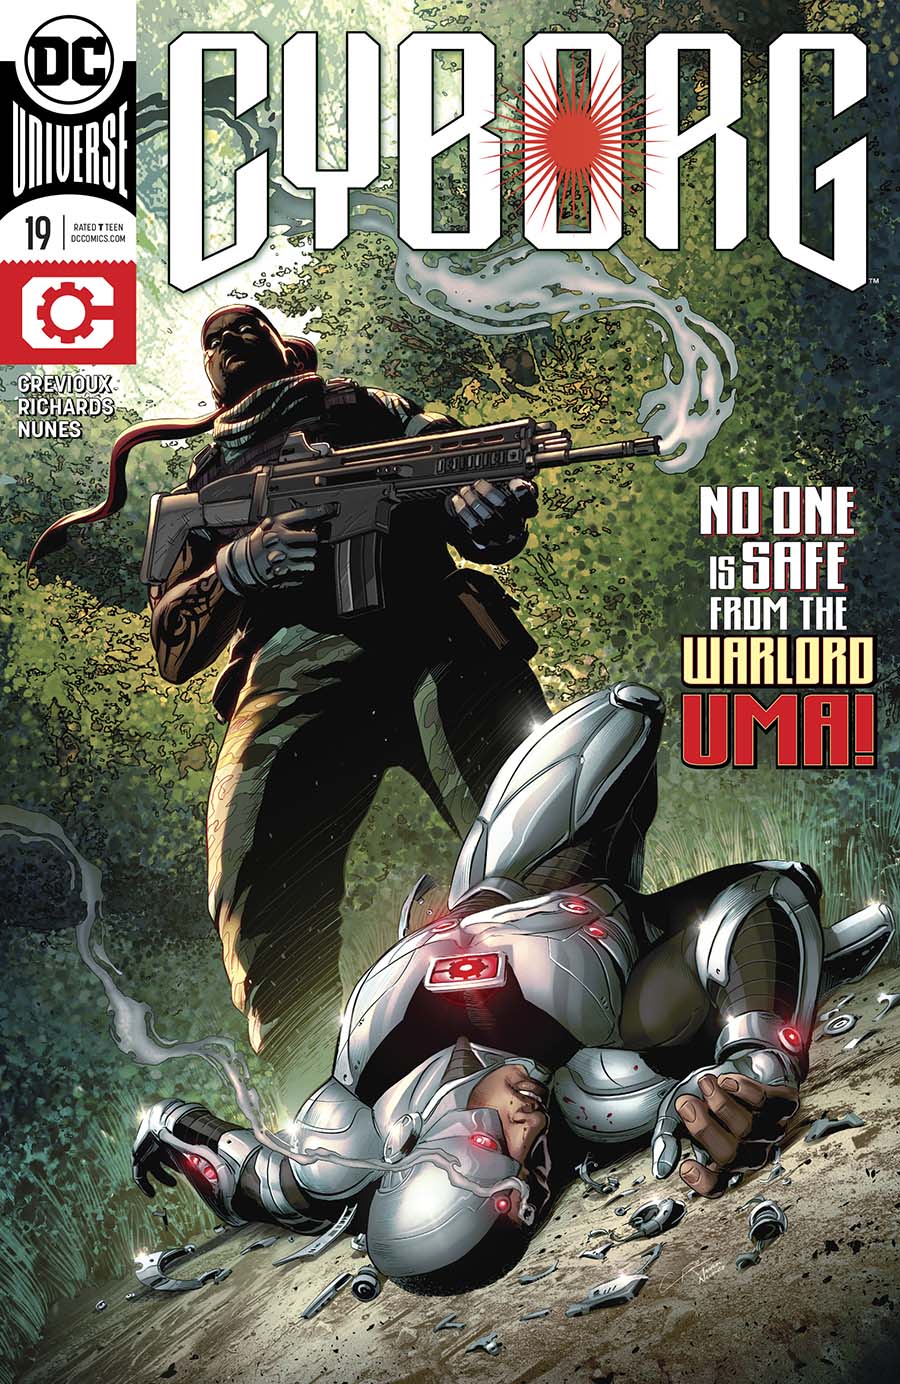 Cyborg Vol 2 #19 Cover A Regular Cliff Richards Cover